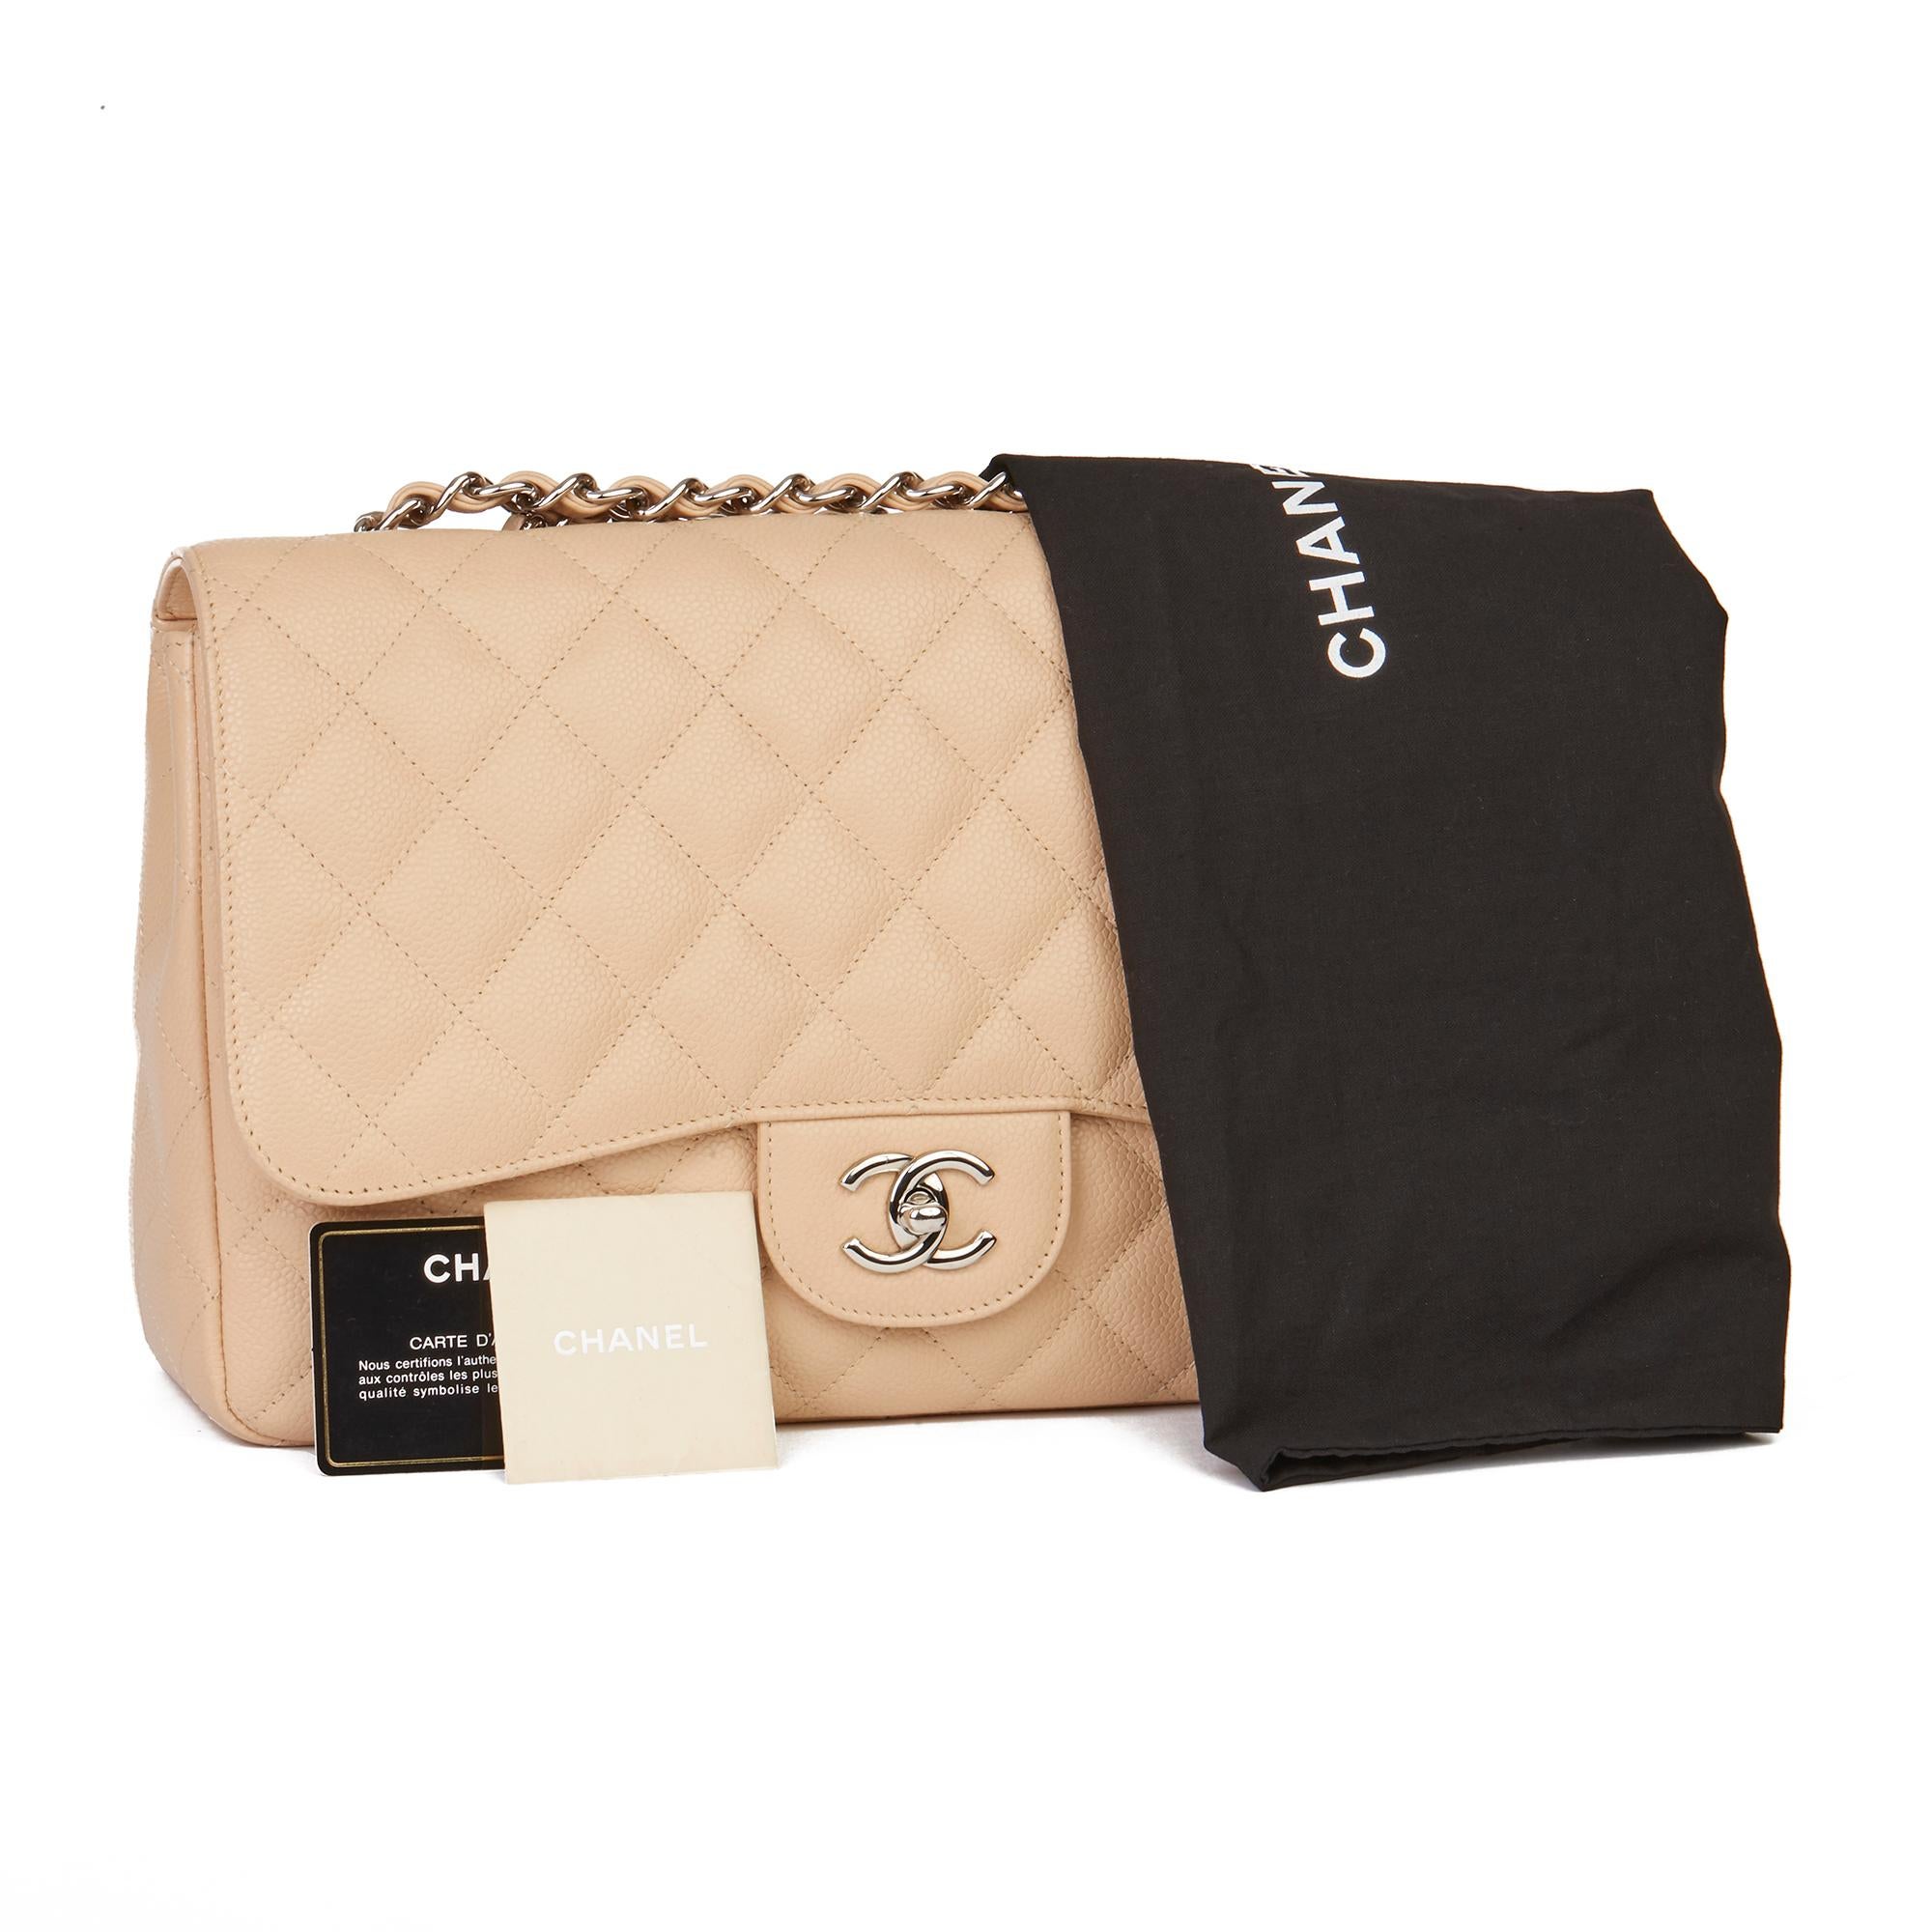 2010 Chanel Beige Quilted Caviar Leather Jumbo Classic Single Flap Bag 5